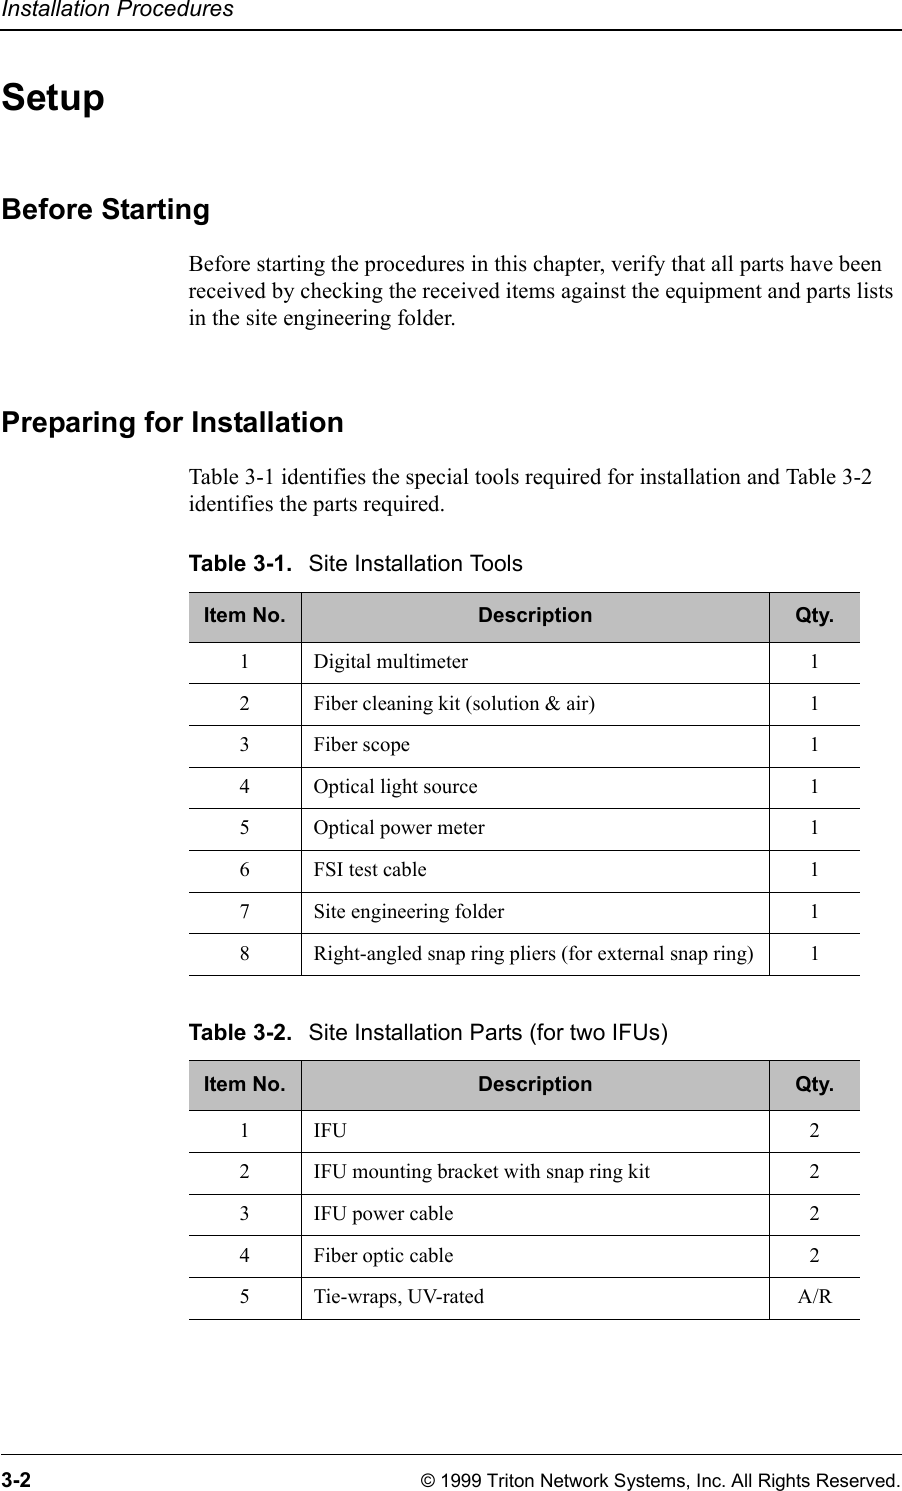 Installation Procedures3-2 © 1999 Triton Network Systems, Inc. All Rights Reserved.SetupBefore StartingBefore starting the procedures in this chapter, verify that all parts have been received by checking the received items against the equipment and parts lists in the site engineering folder.Preparing for InstallationTable 3-1 identifies the special tools required for installation and Table 3-2 identifies the parts required.Table 3-1. Site Installation ToolsItem No. Description Qty.1 Digital multimeter 12 Fiber cleaning kit (solution &amp; air) 13Fiber scope 14 Optical light source 15 Optical power meter 16 FSI test cable 17 Site engineering folder 18 Right-angled snap ring pliers (for external snap ring) 1Table 3-2. Site Installation Parts (for two IFUs)Item No. Description Qty.1IFU 22 IFU mounting bracket with snap ring kit 23 IFU power cable 24 Fiber optic cable 25 Tie-wraps, UV-rated A/R